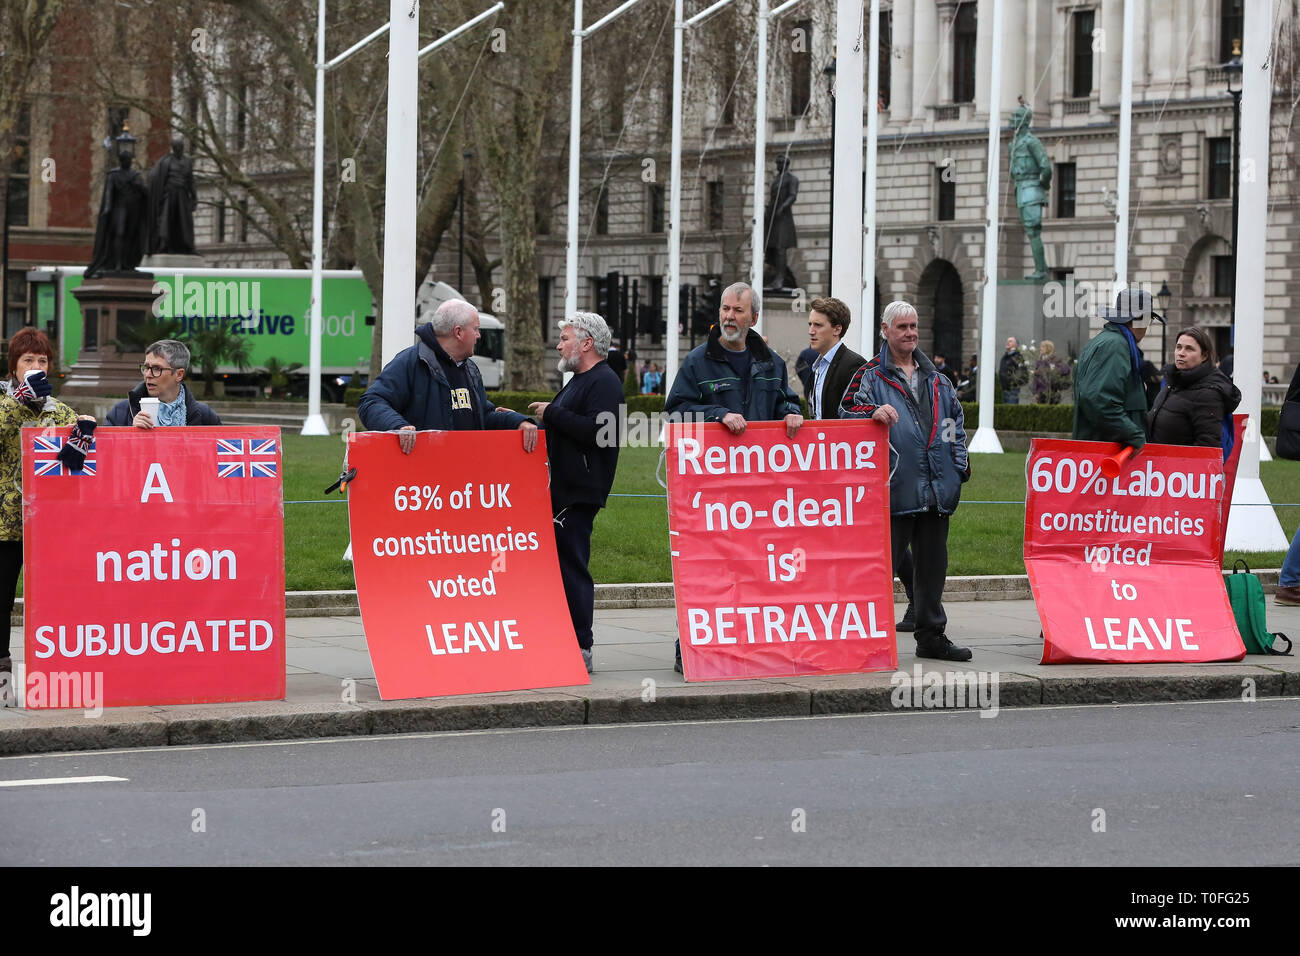 Pro-Brexit demonstrators with placards are seen protesting outside the Houses of Parliament.  The UK will leave the EU on 29 March 2019. Stock Photo